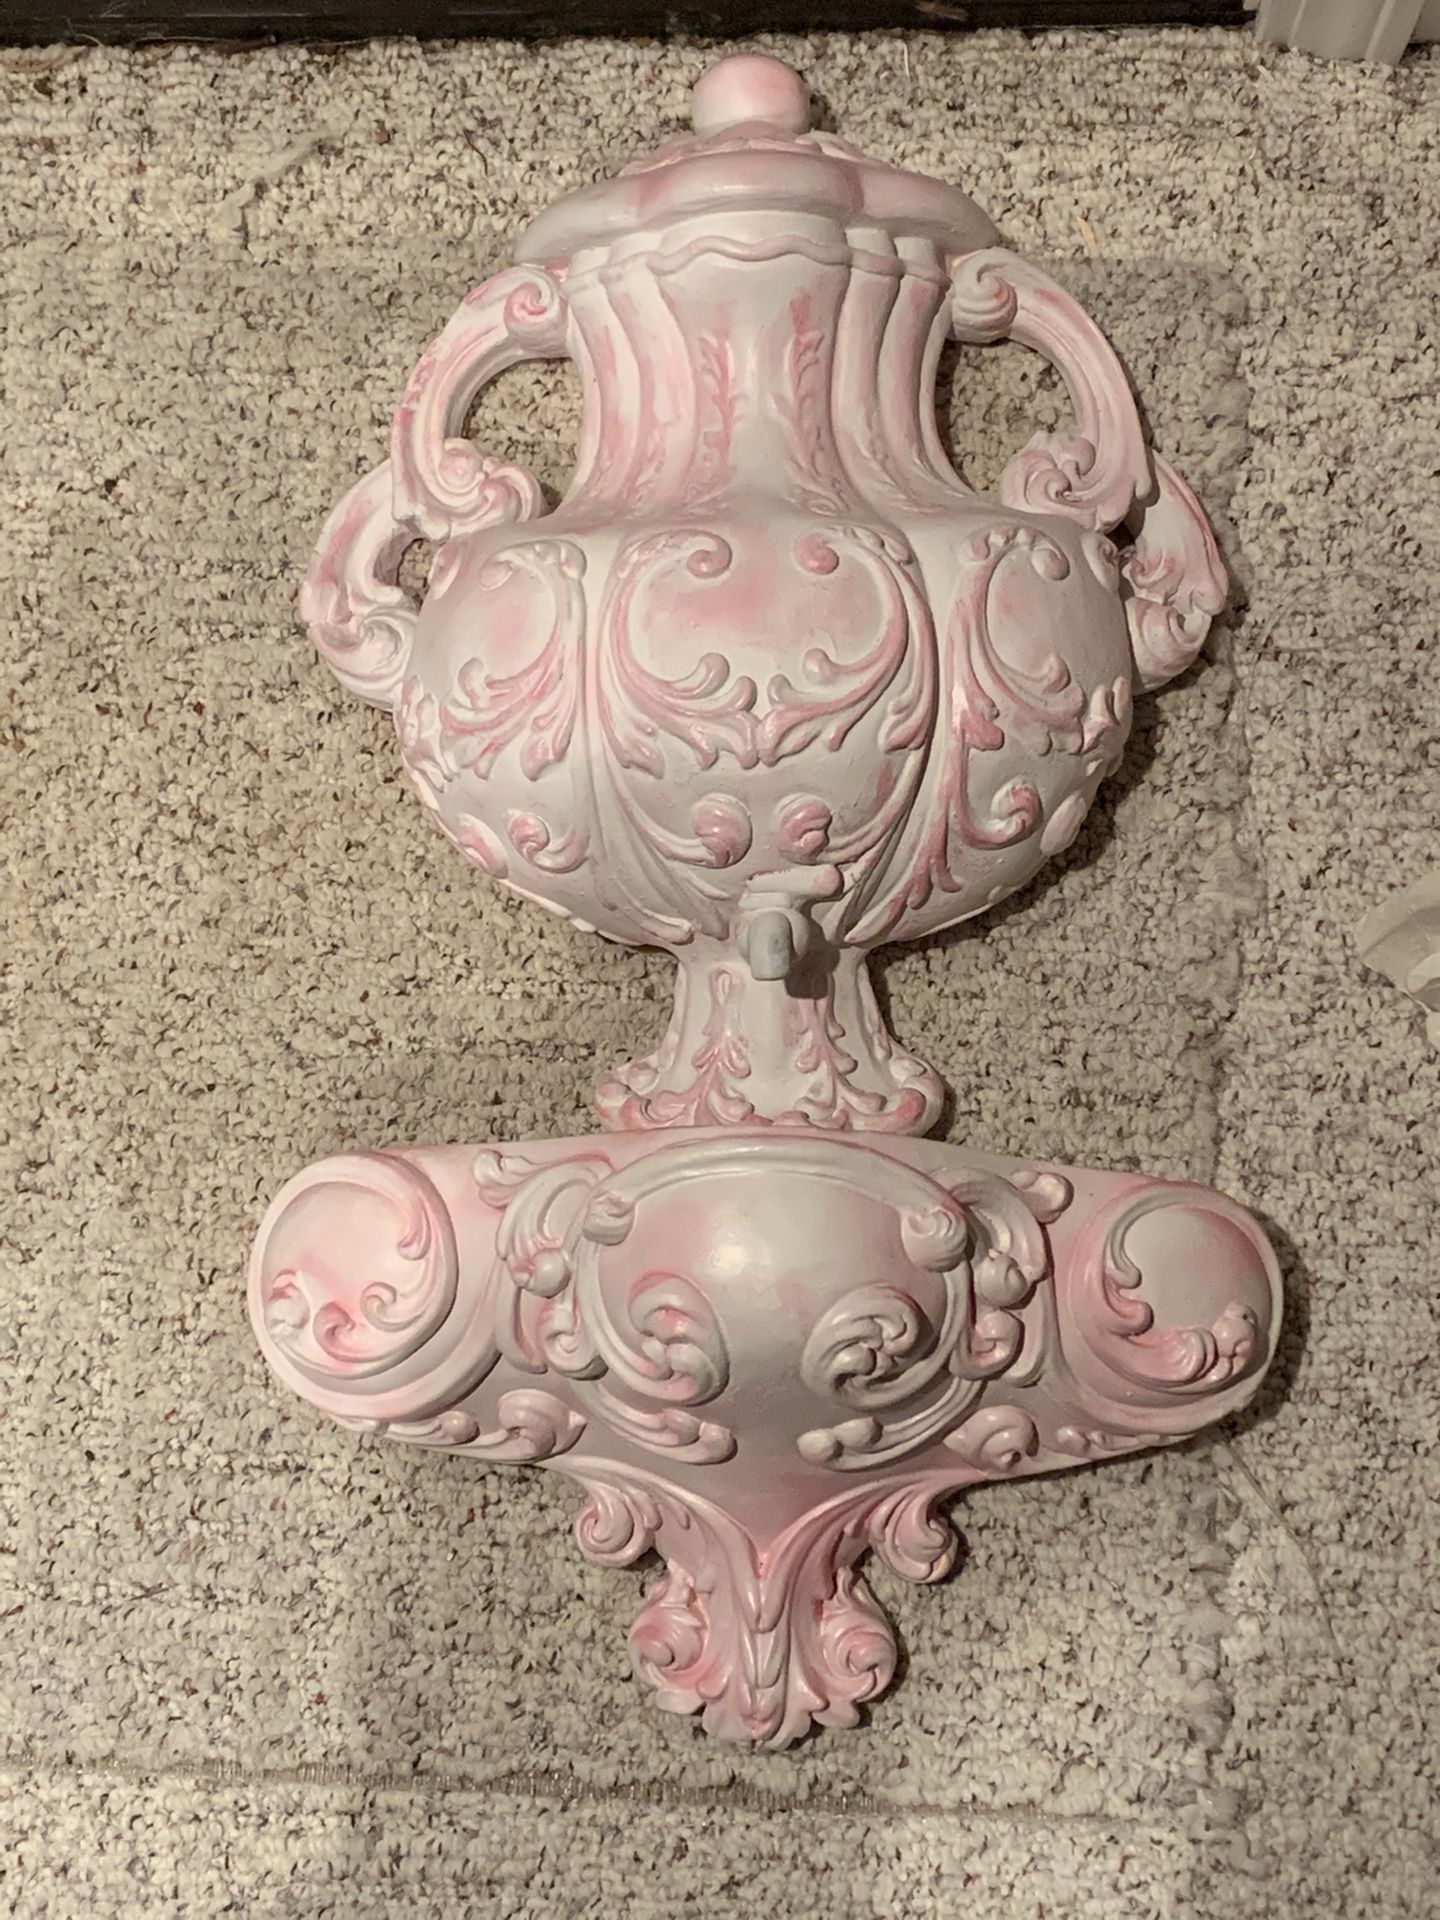 2 piece fountain style decorative wall sconce about 25 in tall